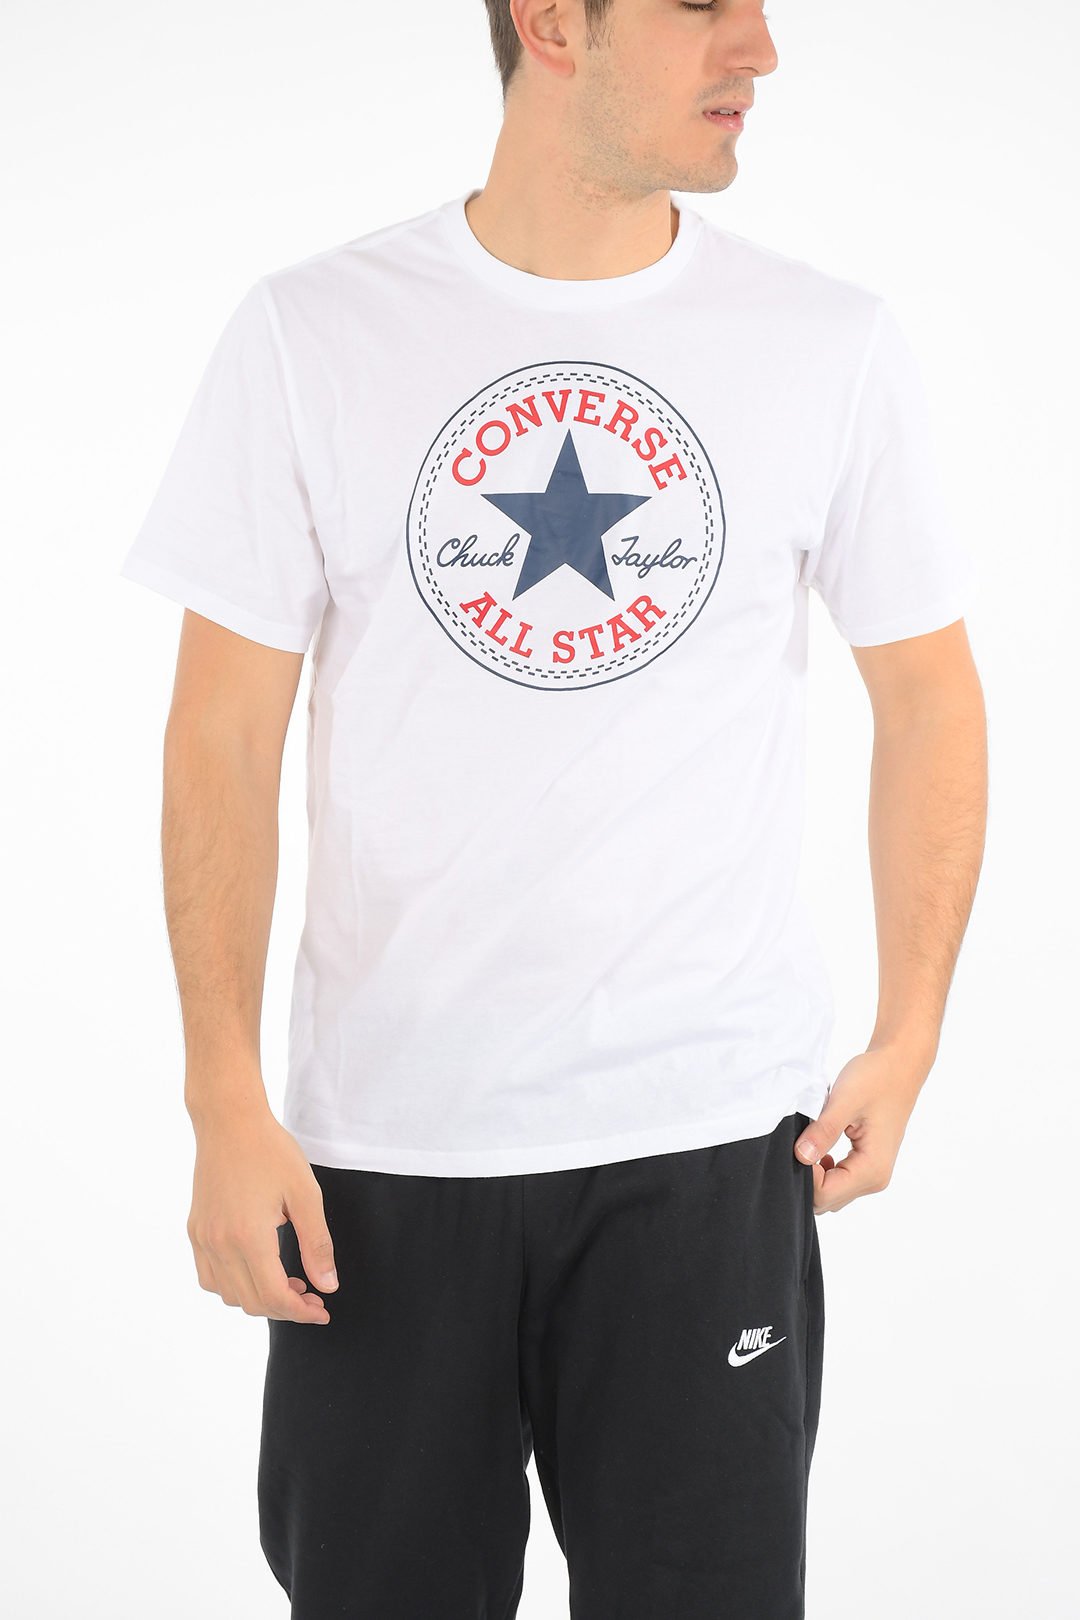 I agree to Samuel Sudan Converse ALL STAR Printed T-shirt men - Glamood Outlet